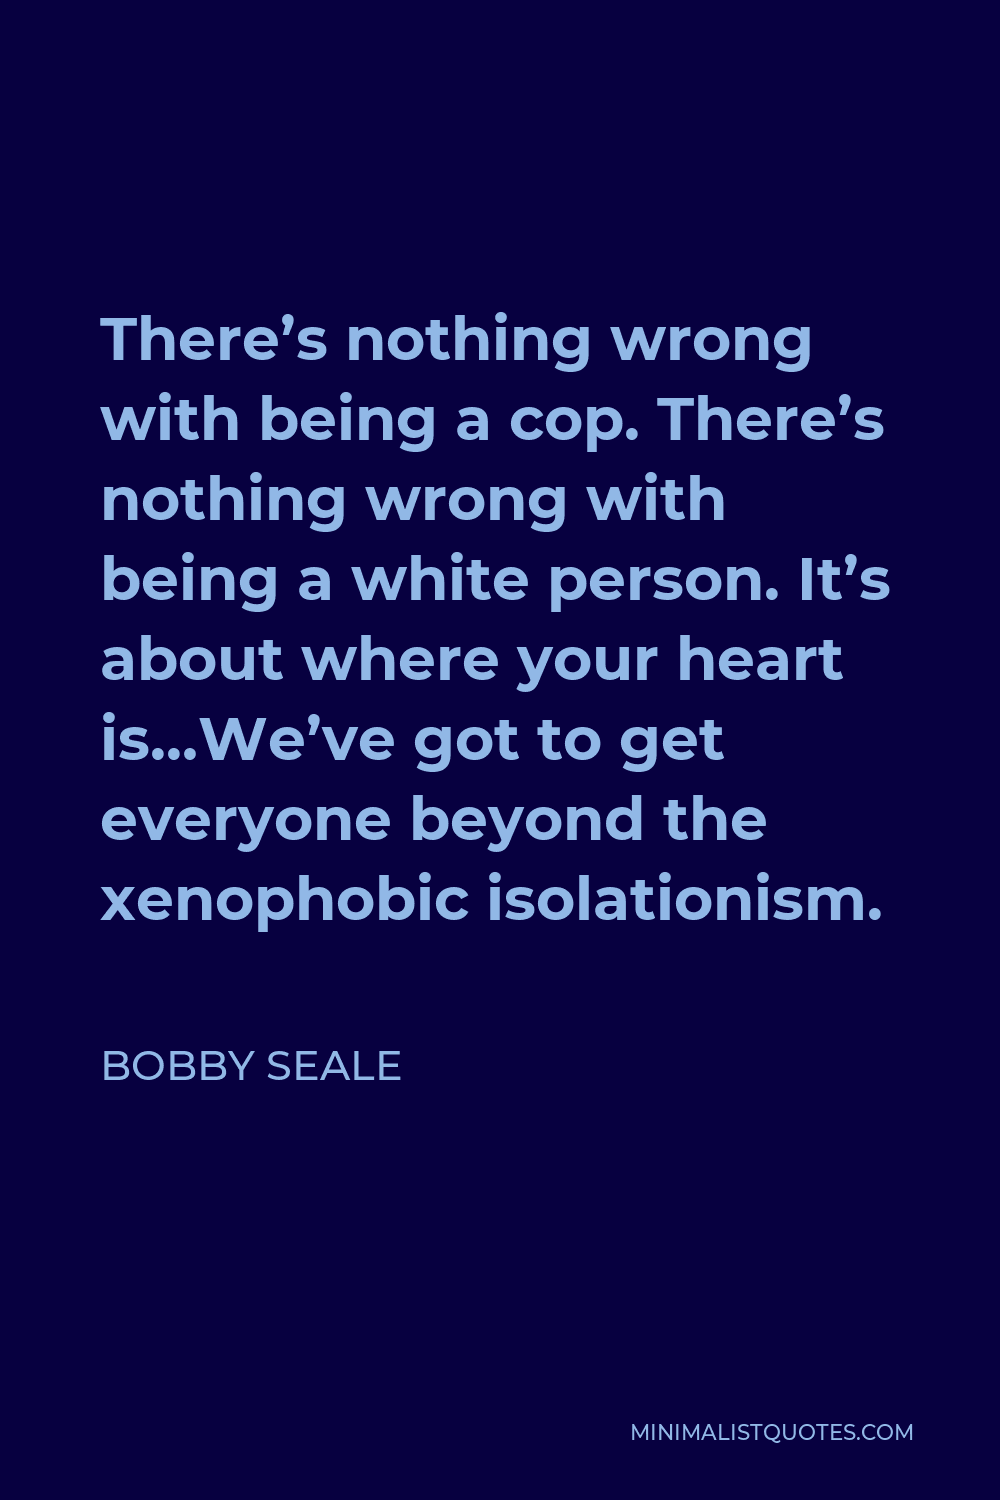 Bobby Seale Quote - There’s nothing wrong with being a cop. There’s nothing wrong with being a white person. It’s about where your heart is…We’ve got to get everyone beyond the xenophobic isolationism.